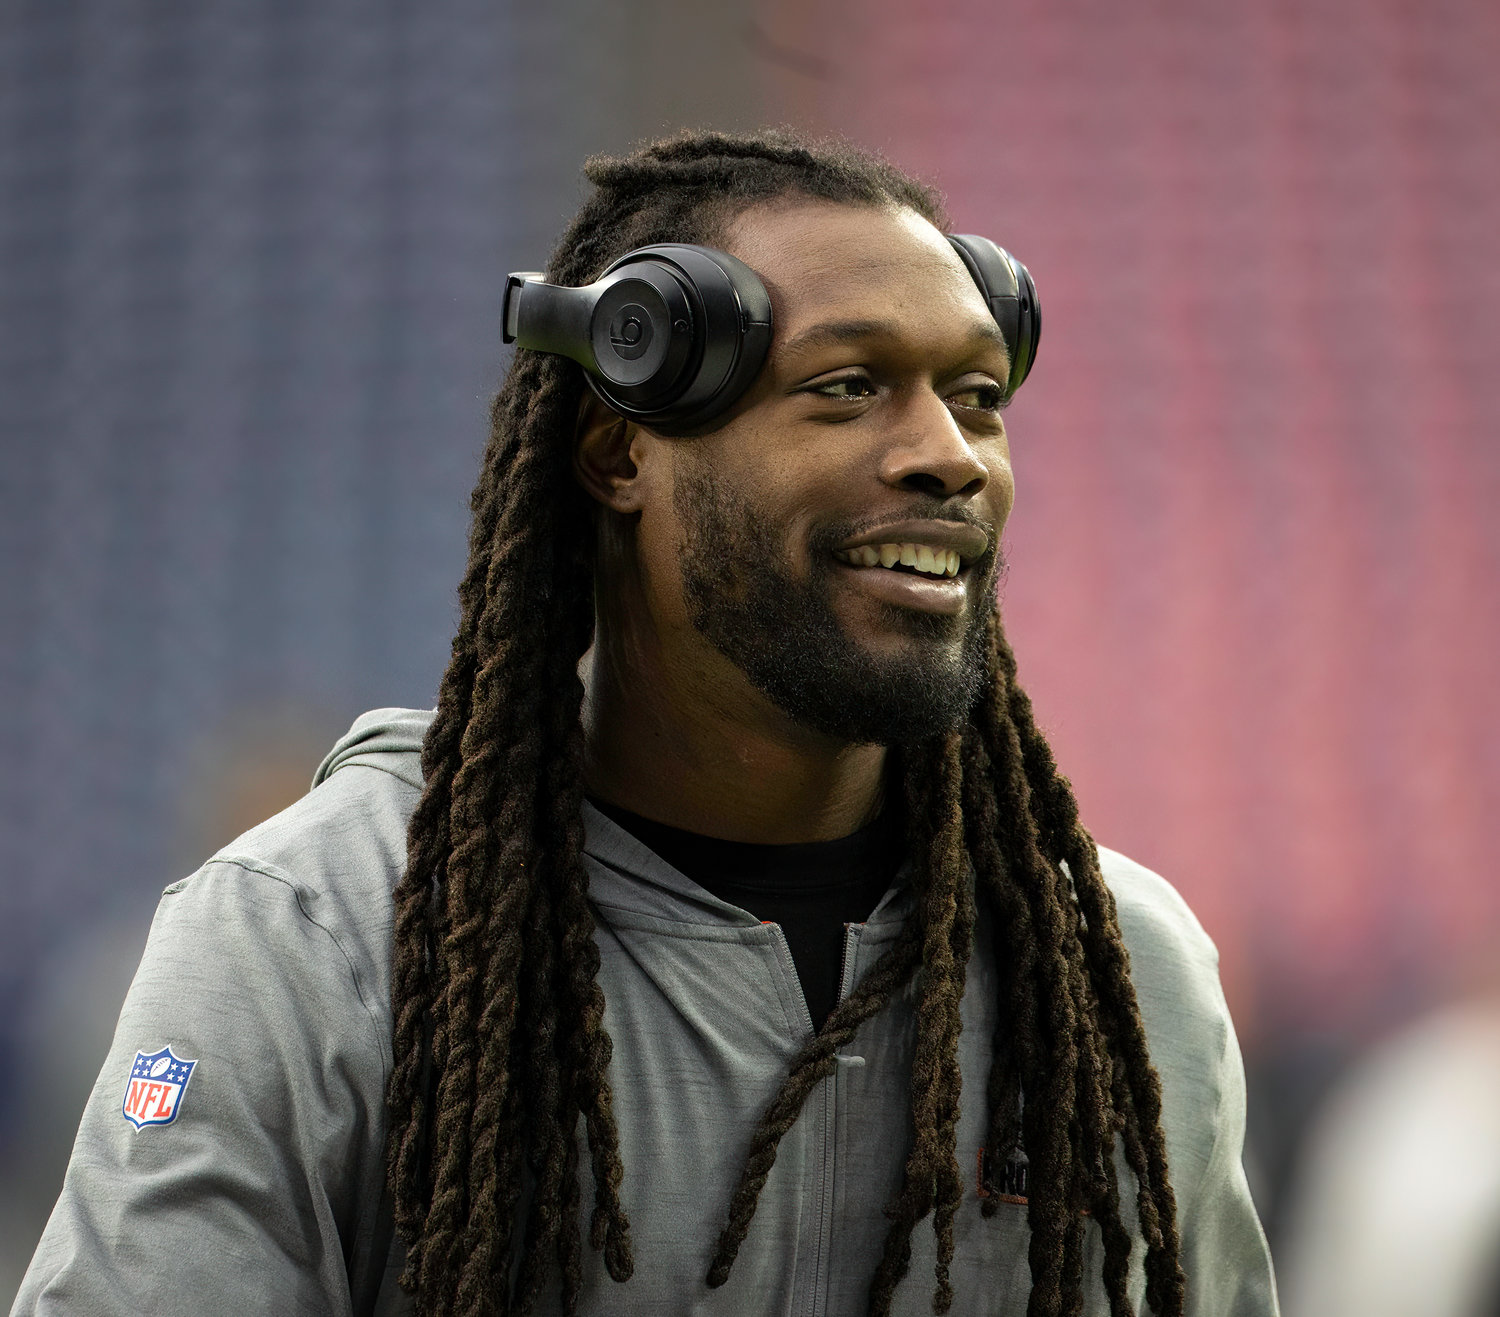 Former Houston Texans player and current Cleveland Browns defensive end Jadeveon Clowney arrives at NRG Stadium ahead of an NFL game between the Texans and the Browns on Dec. 4, 2022, in Houston.